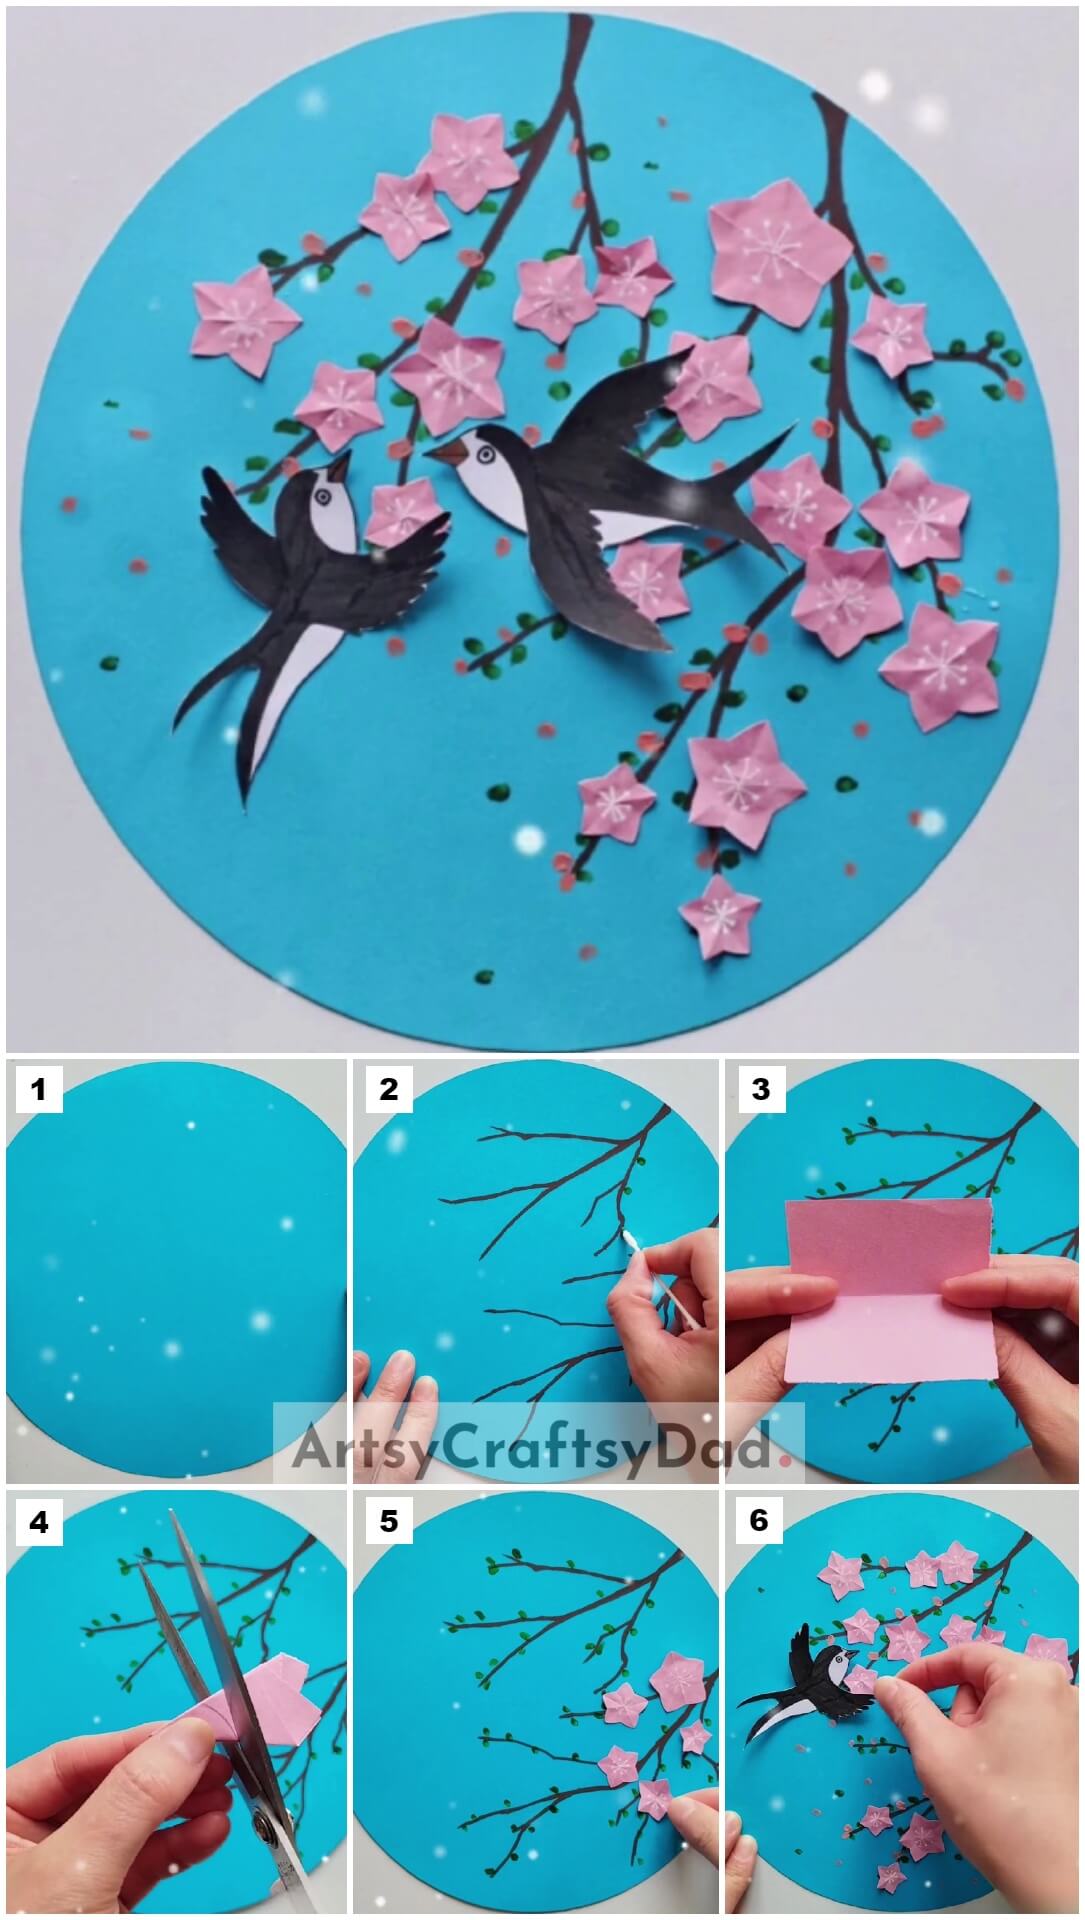 Cheery Blossom Tree With Swallow Birds - Paper Artwork Tutorial